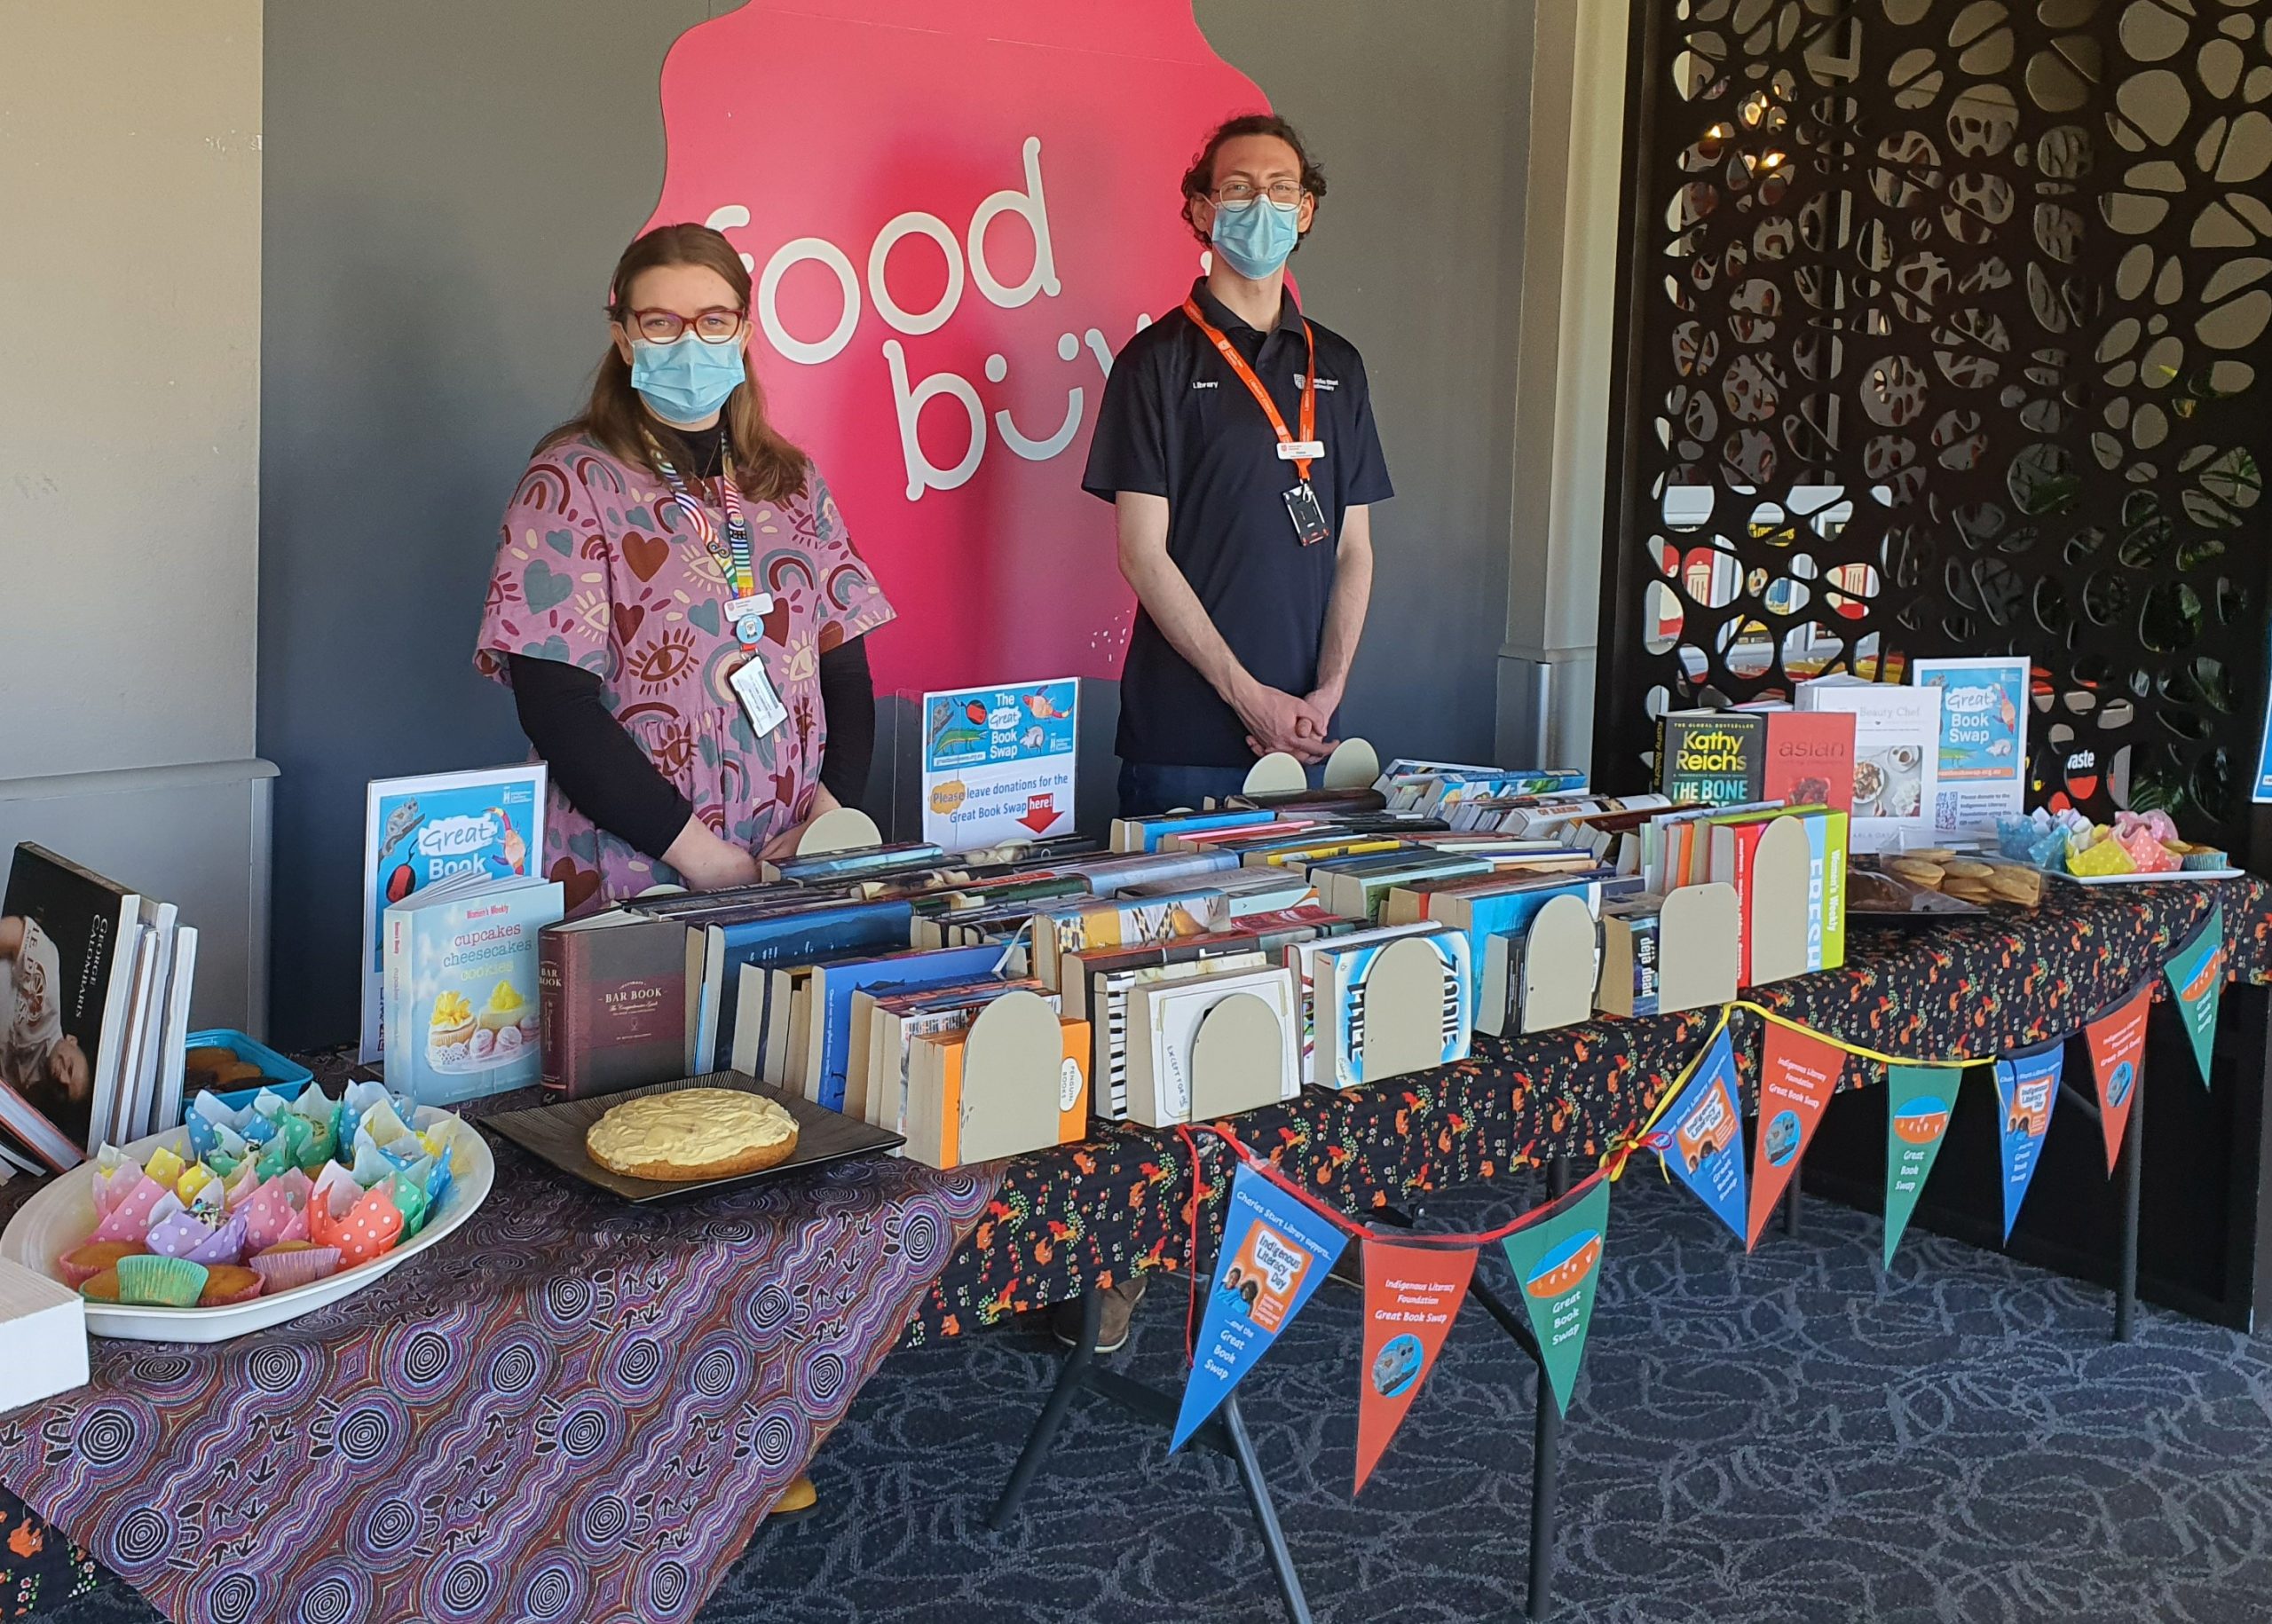 Library staff members Bea and Pat at the Great Book Swap stall in Bathurst. They are standing behind a large tables filled with books and cakes.